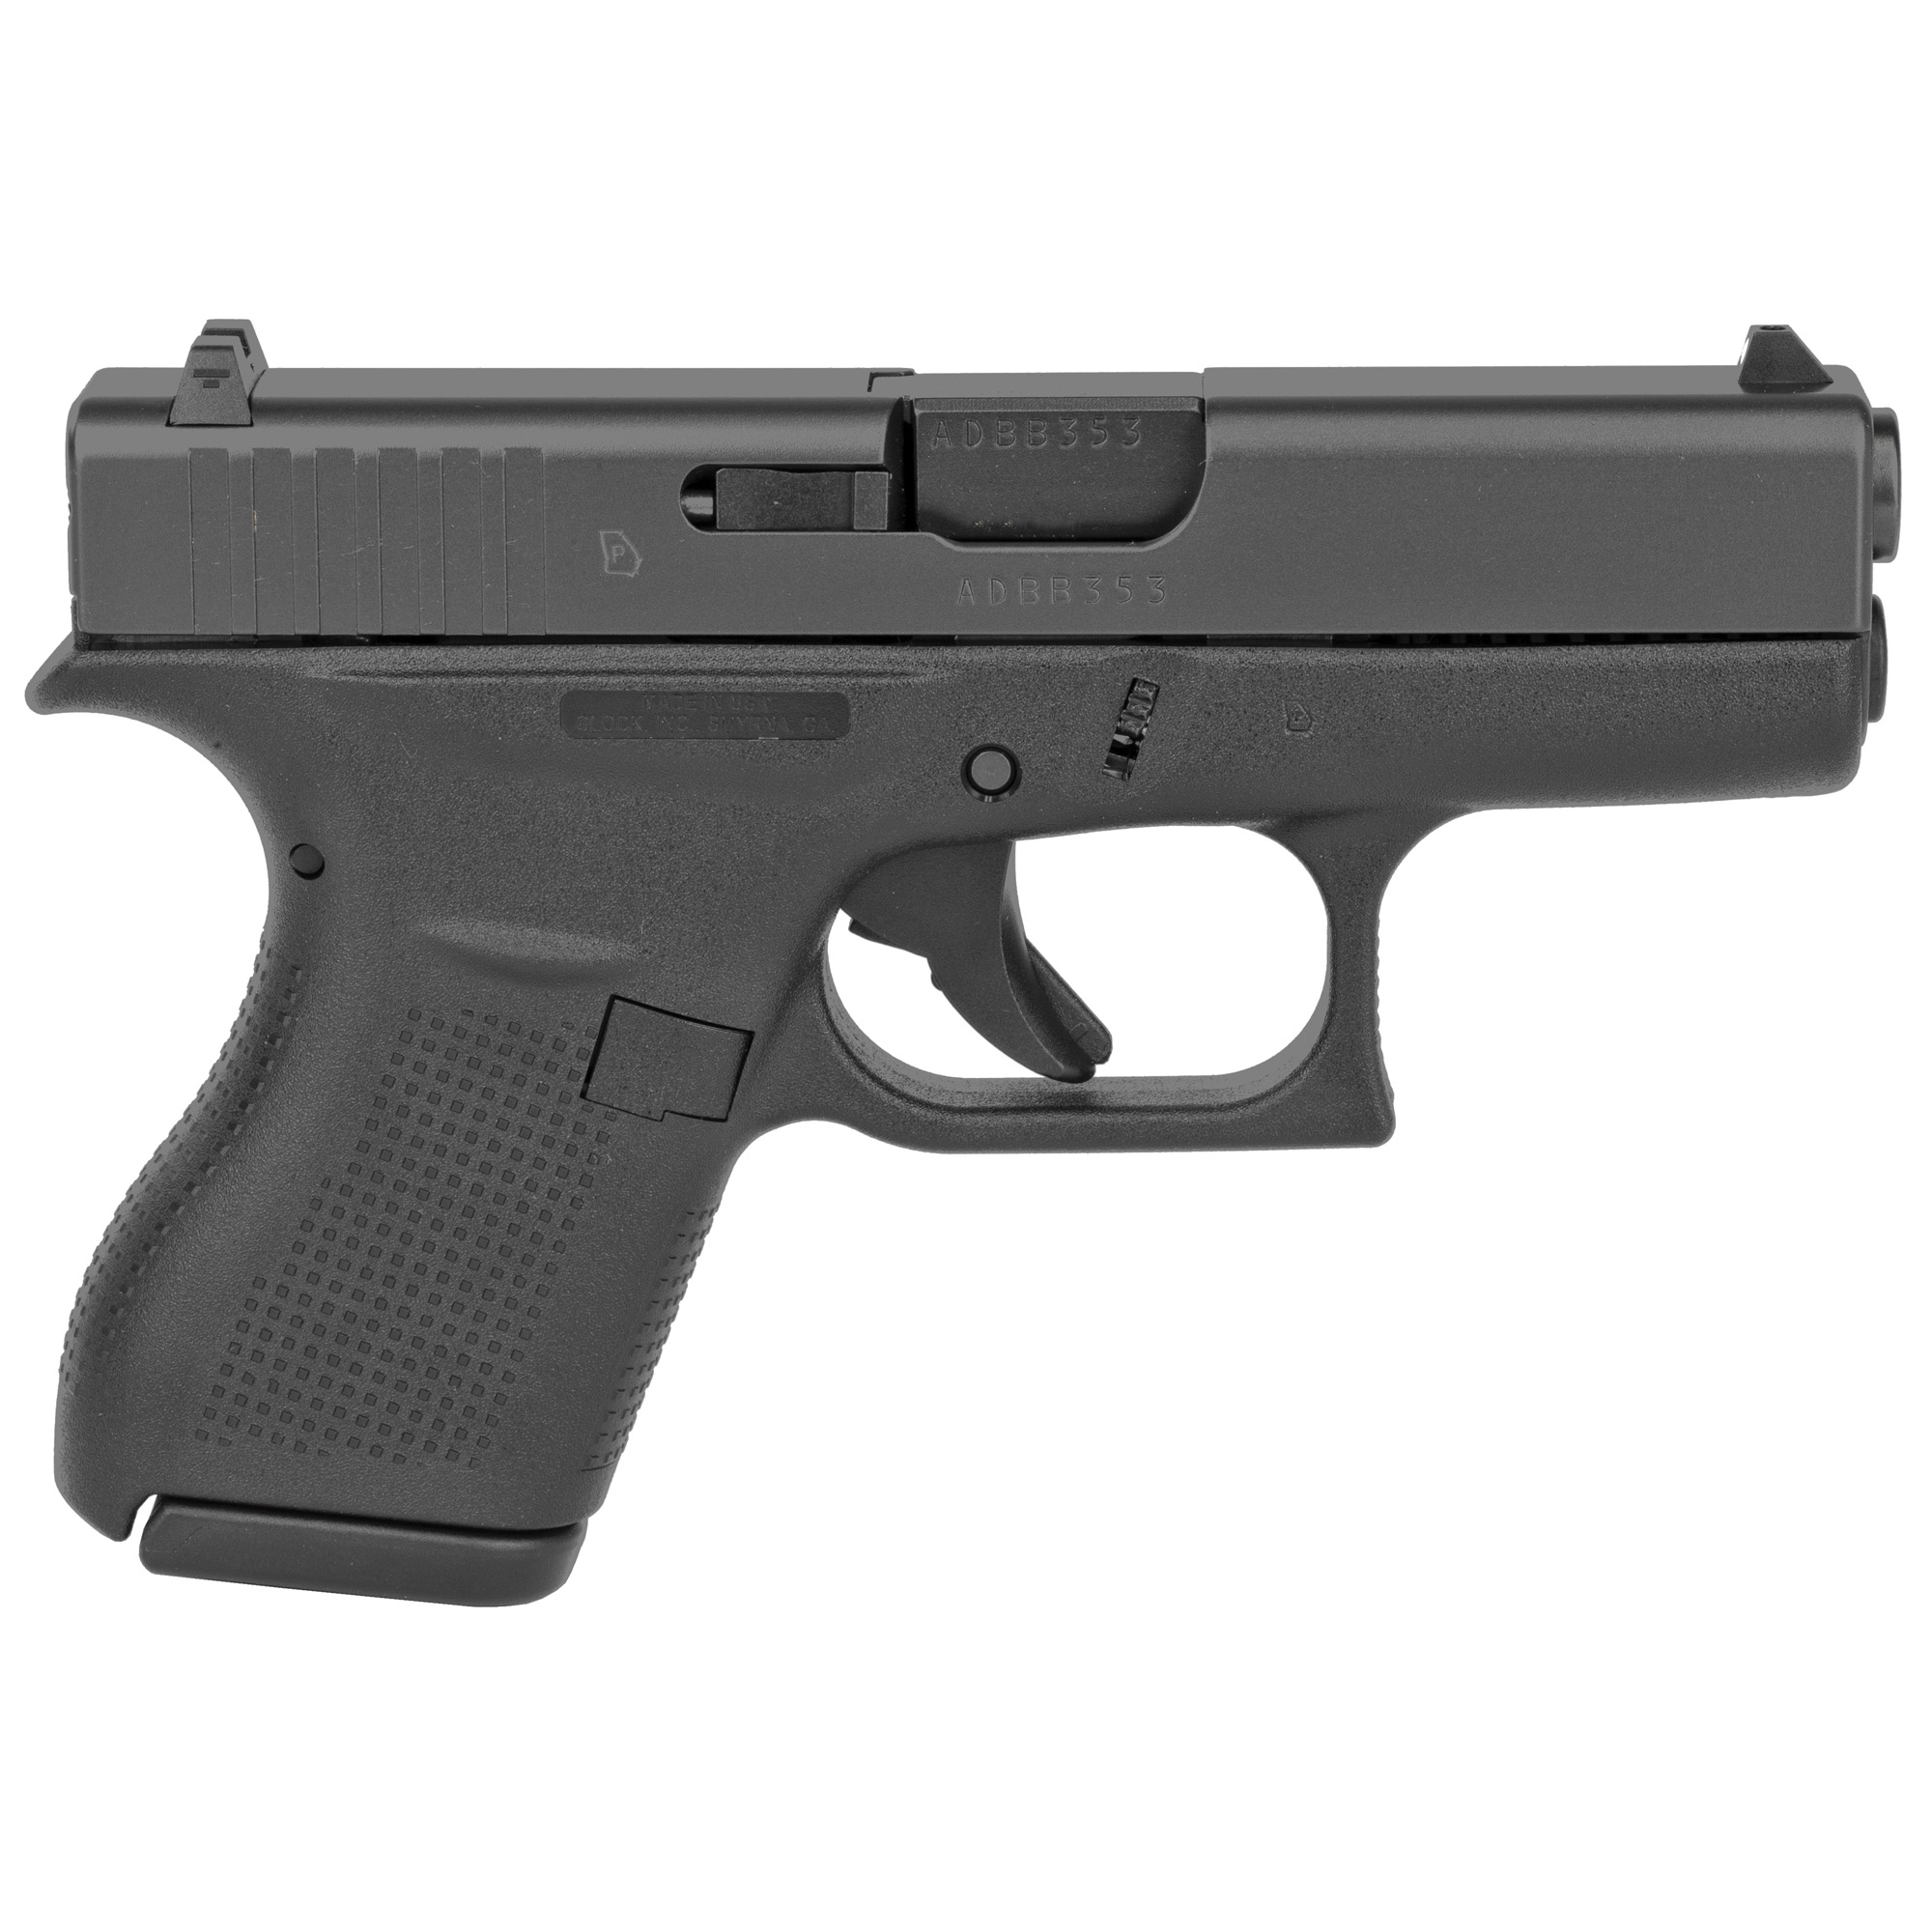 Glock, 42, Striker Fired, Semi-automatic, Polymer Frame Pistol, Sub-Compact, 380 ACP, 3.25" Barrel, Matte Finish, Black, No Finger Grooves, Fixed Sights, 6 Rounds, 2 Magazines